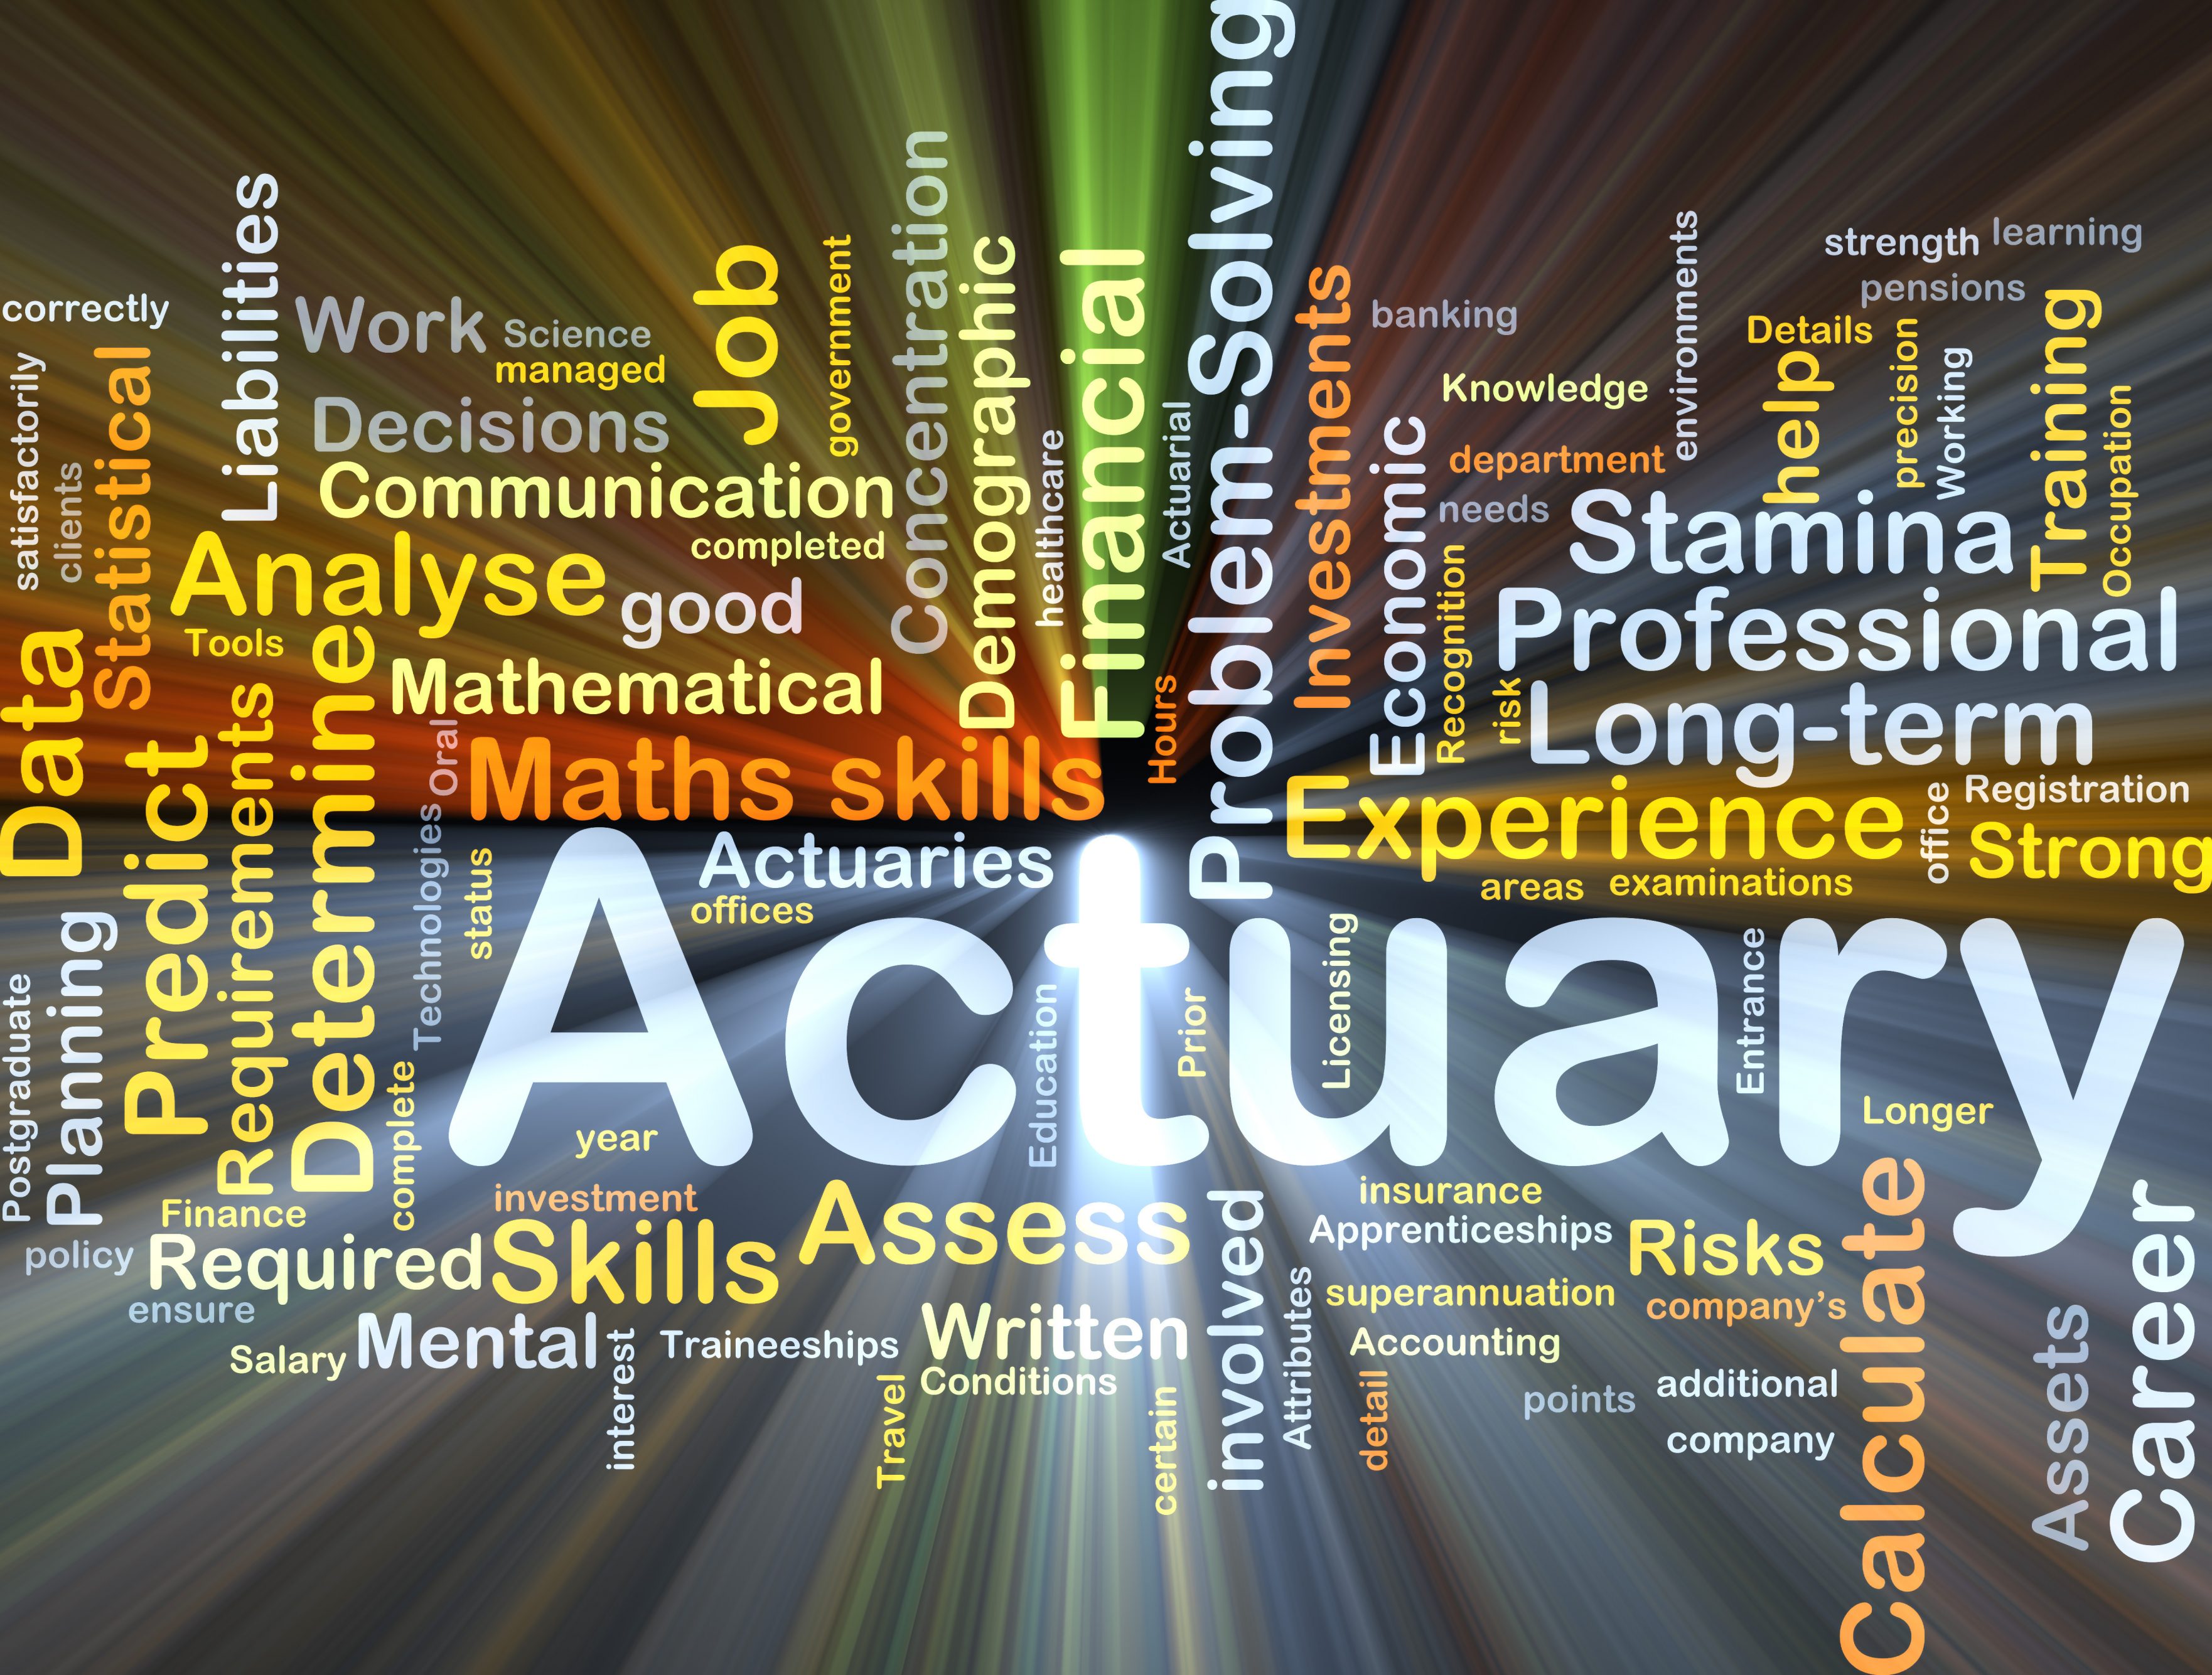 Word cloud which features the word 'Actuary' at the centre